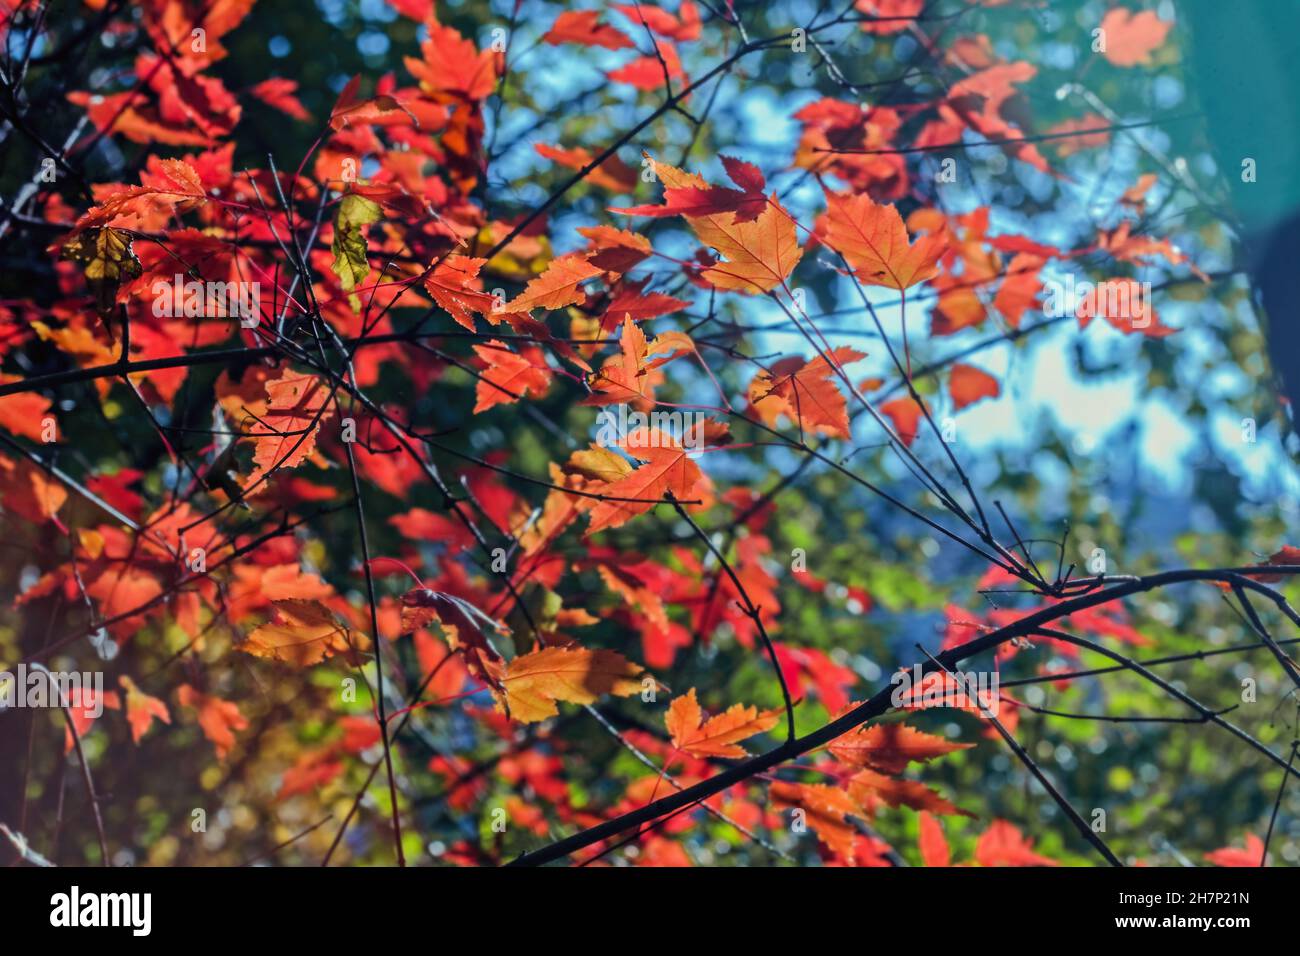 Orange-red autumn leaves on sunny day for happy real mood Stock Photo